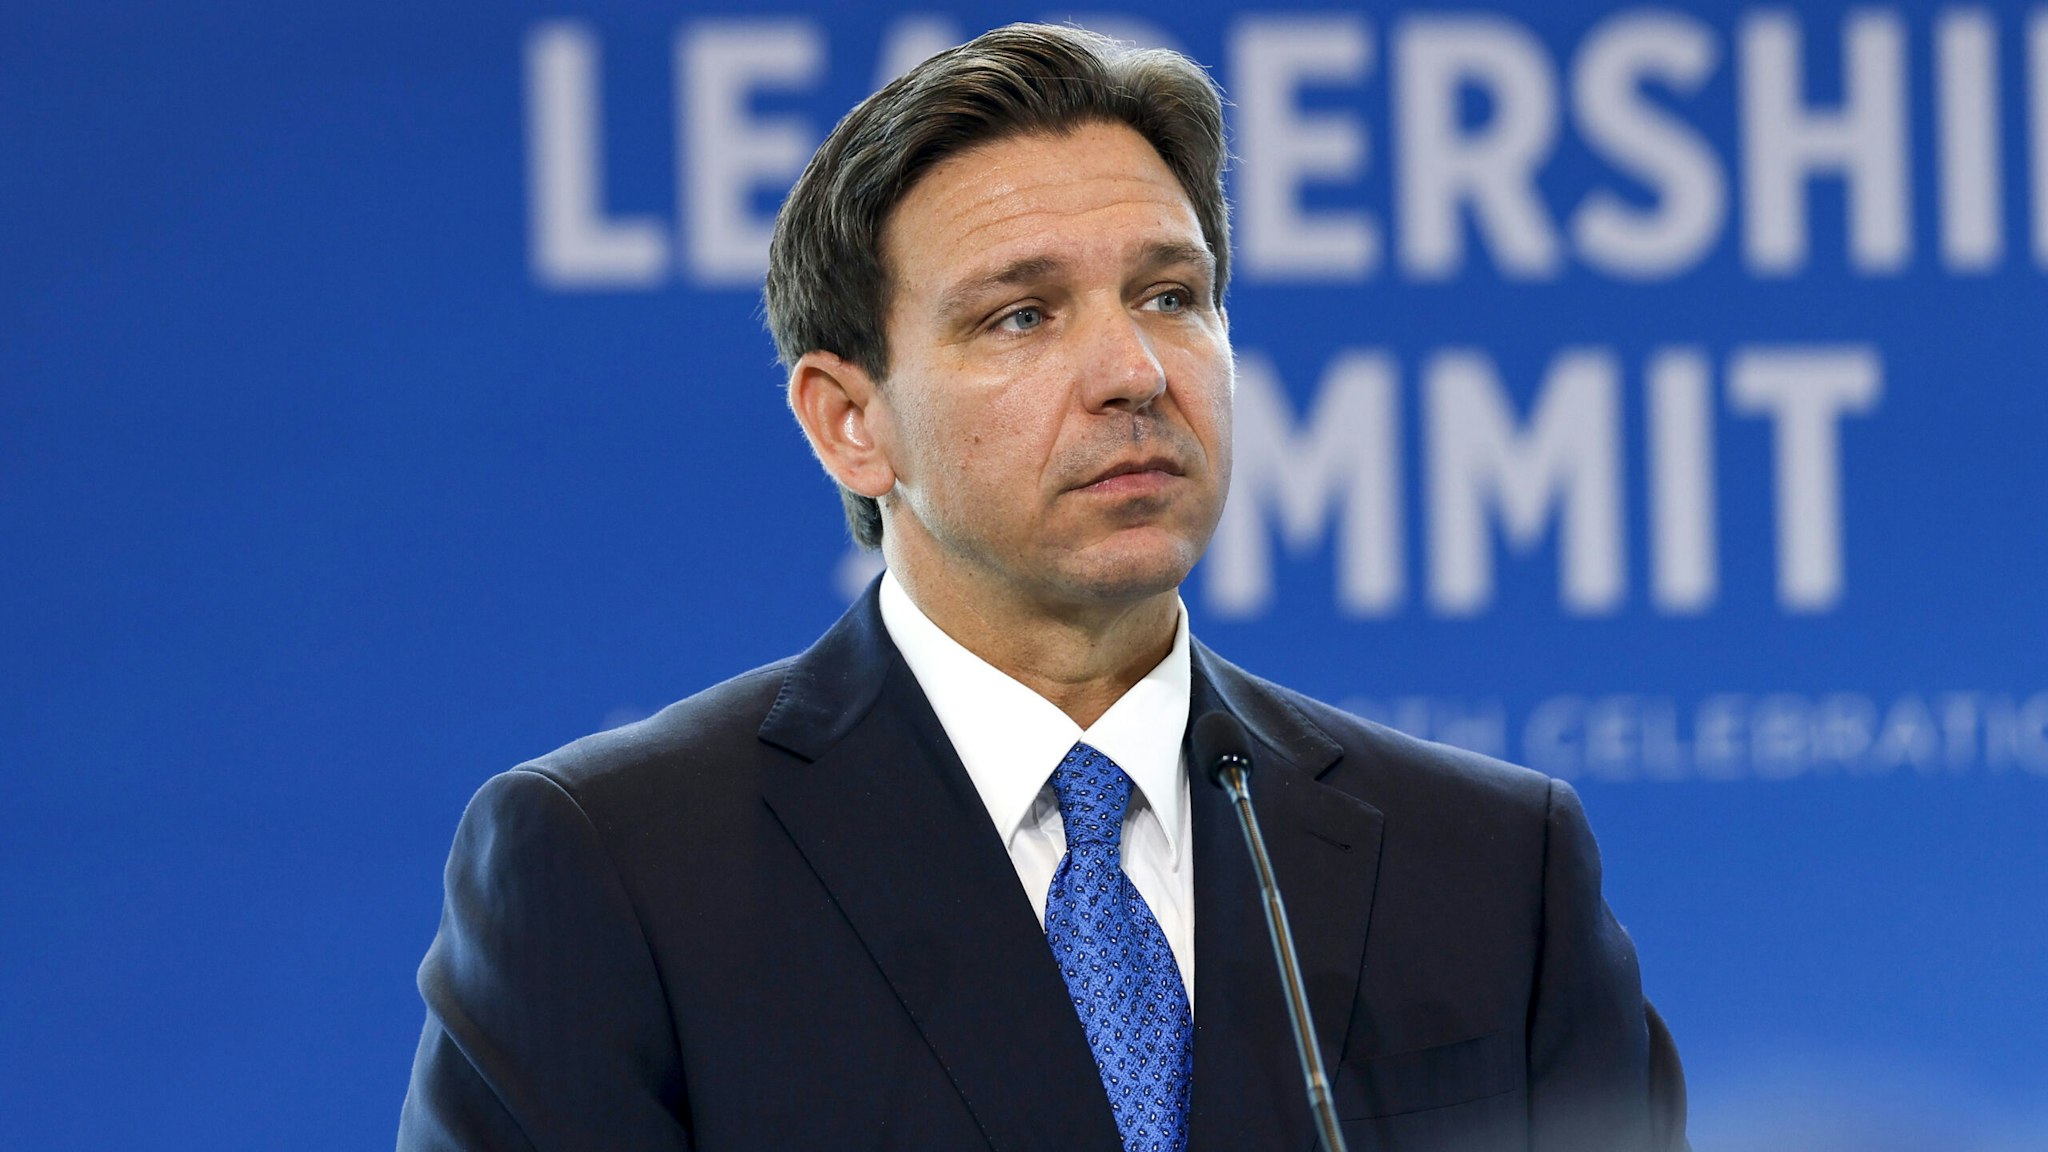 NATIONAL HARBOR, MARYLAND - APRIL 21: Florida Gov. Ron DeSantis gives remarks at the Heritage Foundation's 50th Anniversary Leadership Summit at the Gaylord National Resort &amp; Convention Center on April 21, 2023 in National Harbor, Maryland. During his remarks DeSantis spoke on policy and social issues his administration has taken on in the state of Florida including education in schools, funding law enforcement, and gun legislation.